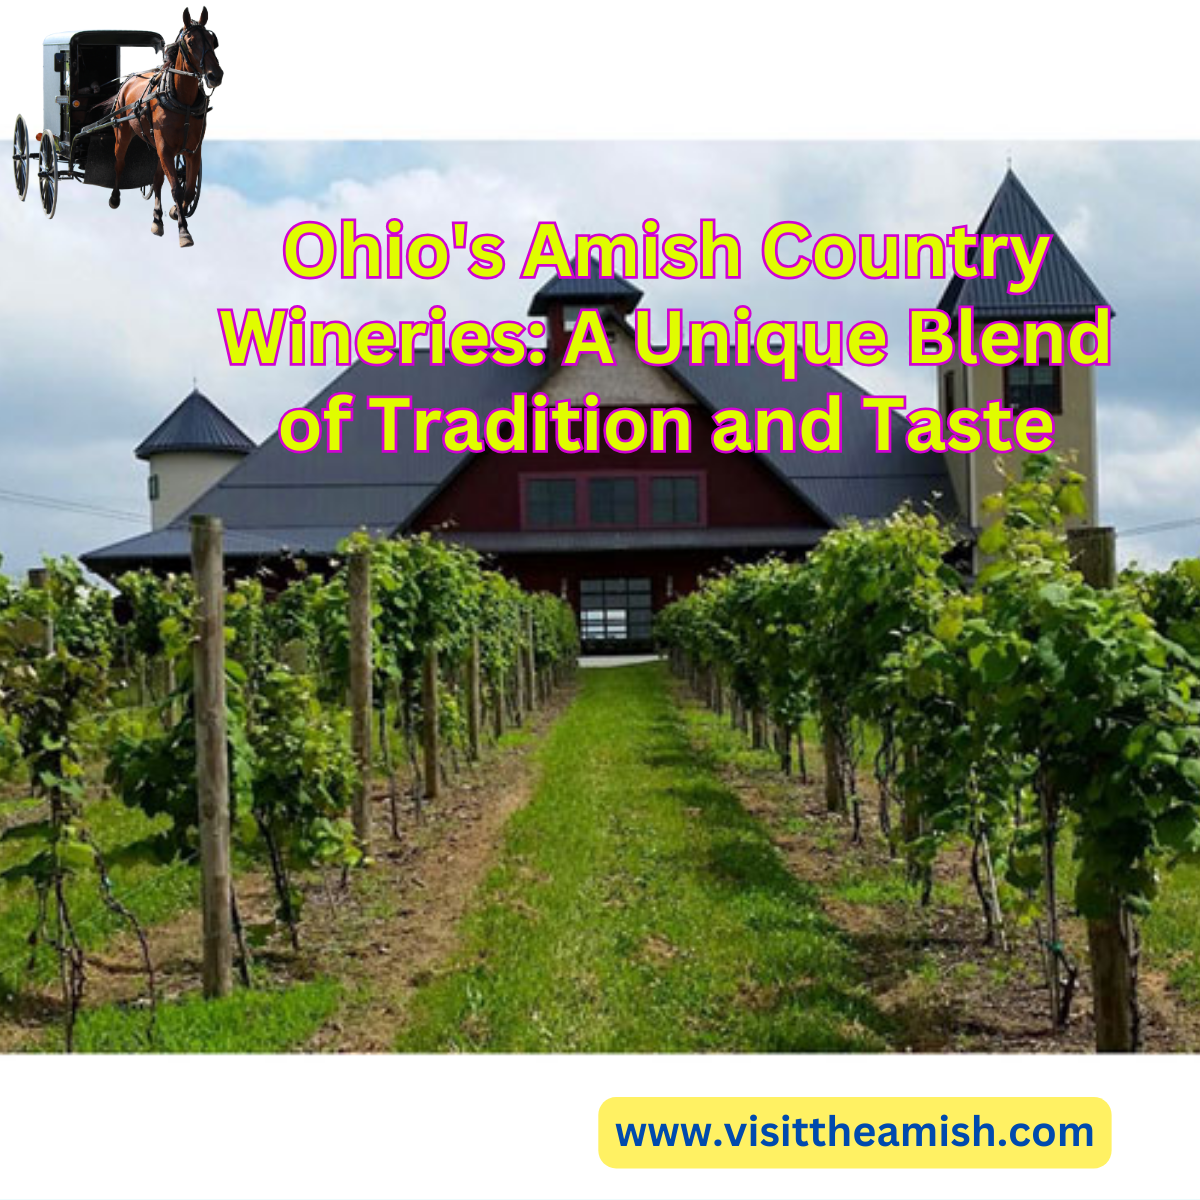 Ohio's Amish Country Wineries A Unique Blend of Tradition and Tast